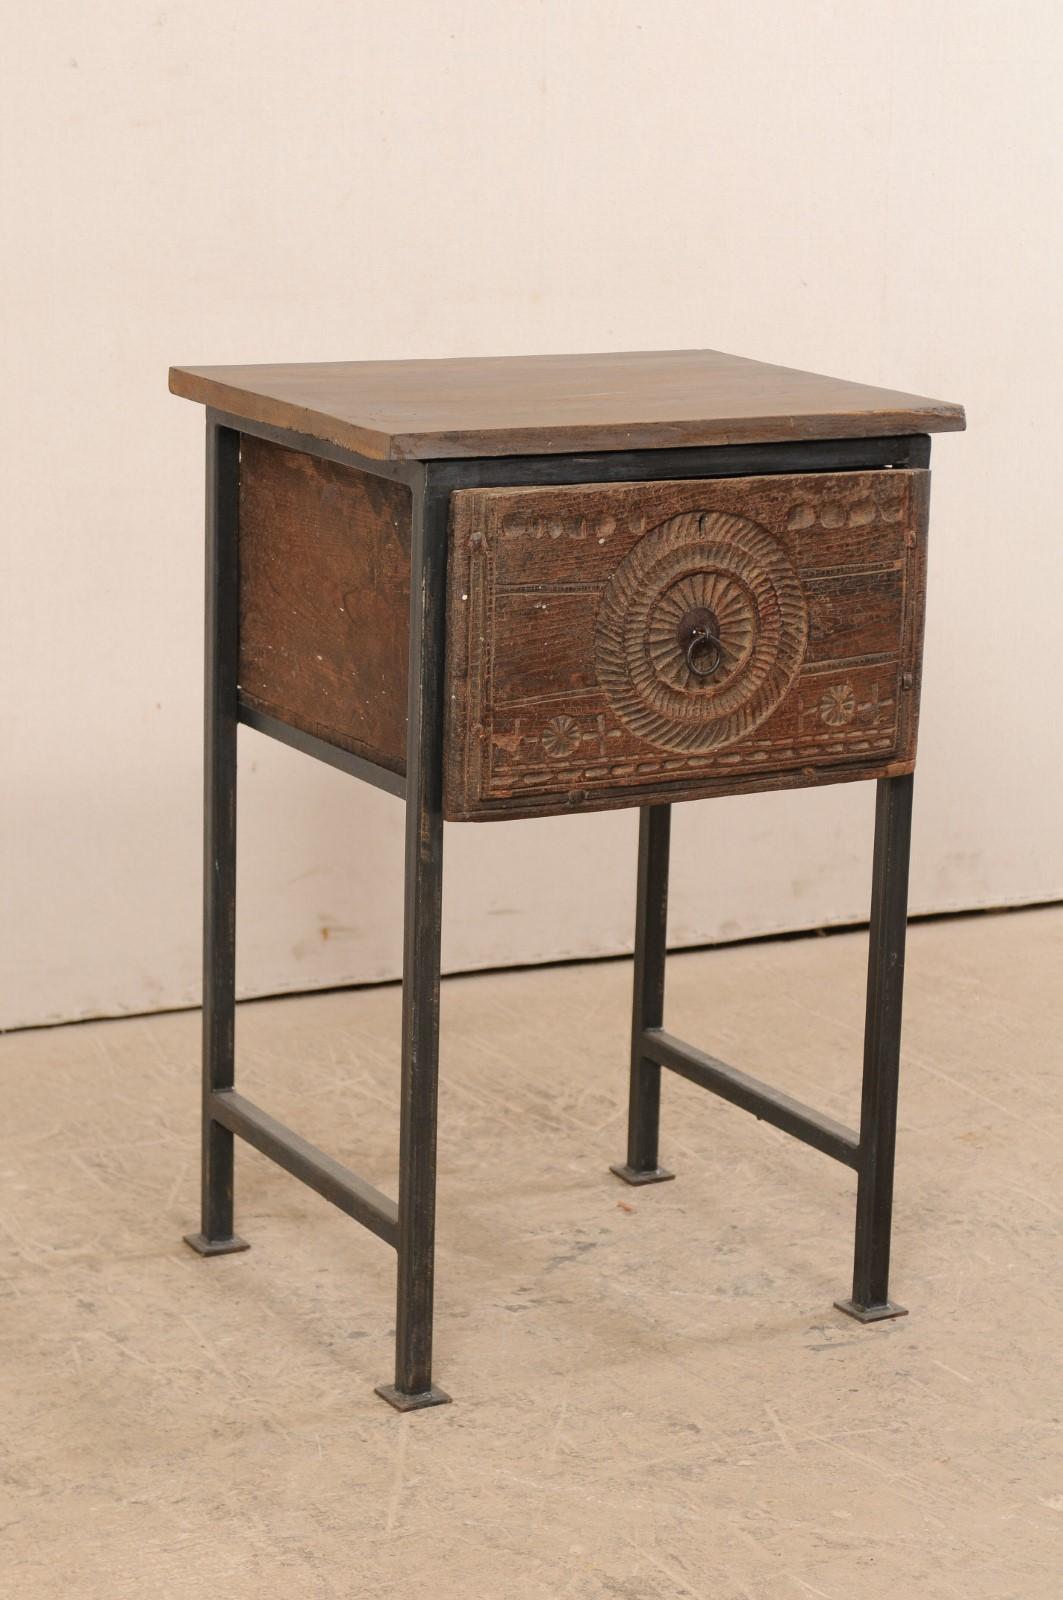 A smaller-sized side chest with 18th century Spanish door. This unique and custom designed side chest features an 18th century (or earlier) carved wood drawer from Spain, which has been topped with reclaimed wood above, and set within a custom iron